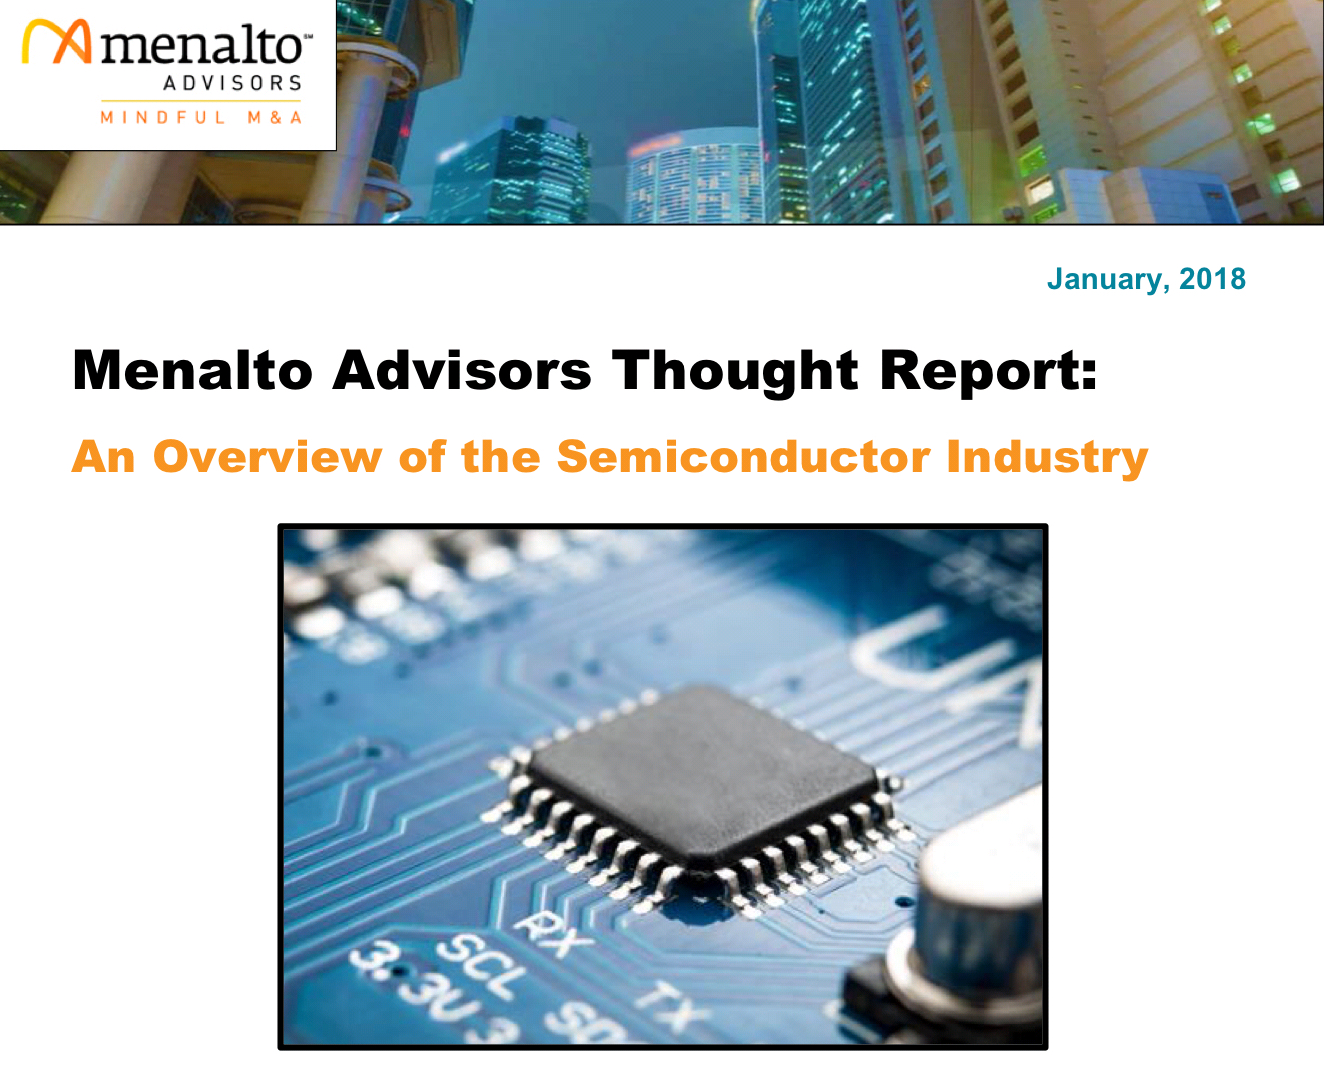 ActLight SA has been included in “Menalto Advisory thought report: an overview of the semiconductor industry”